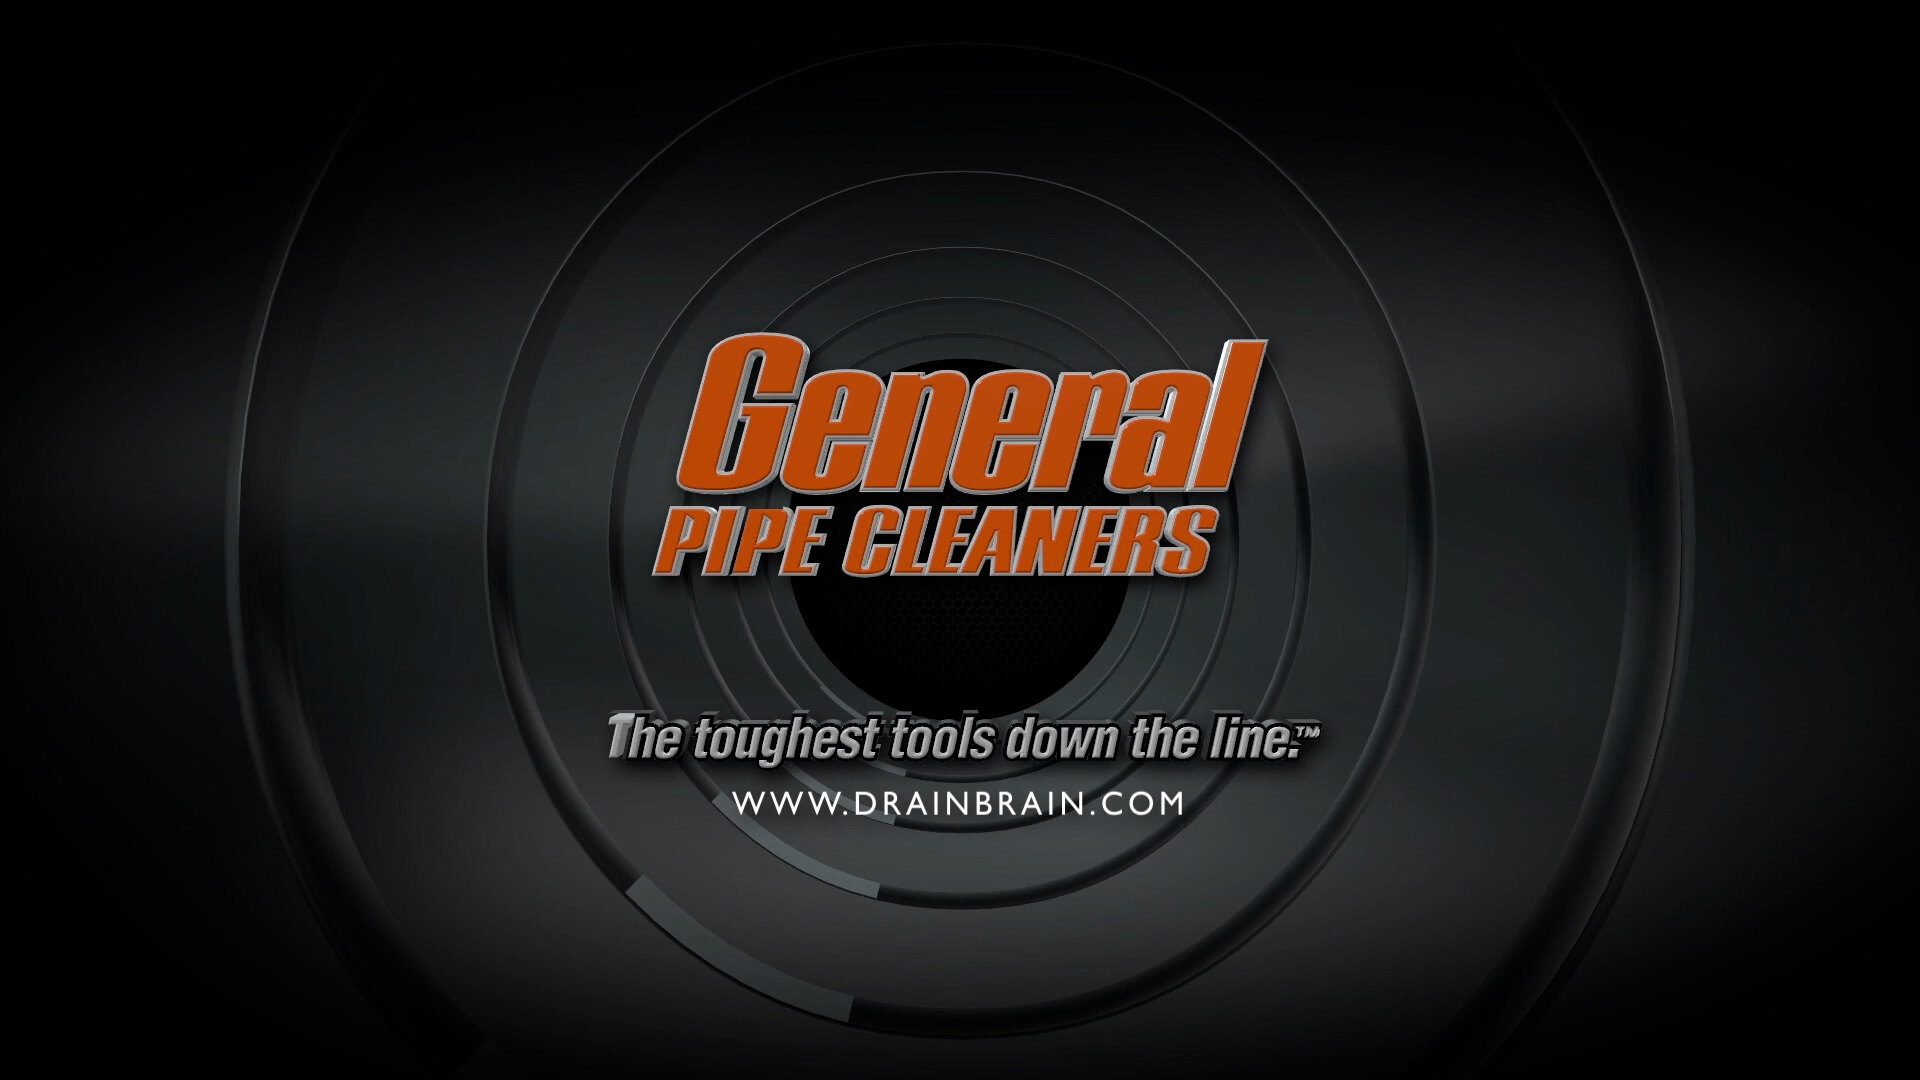 General Wire 100020, General Wire 100020 General Super Vee SV-A Pipe & sewer  drain snake cleaner rooter auger